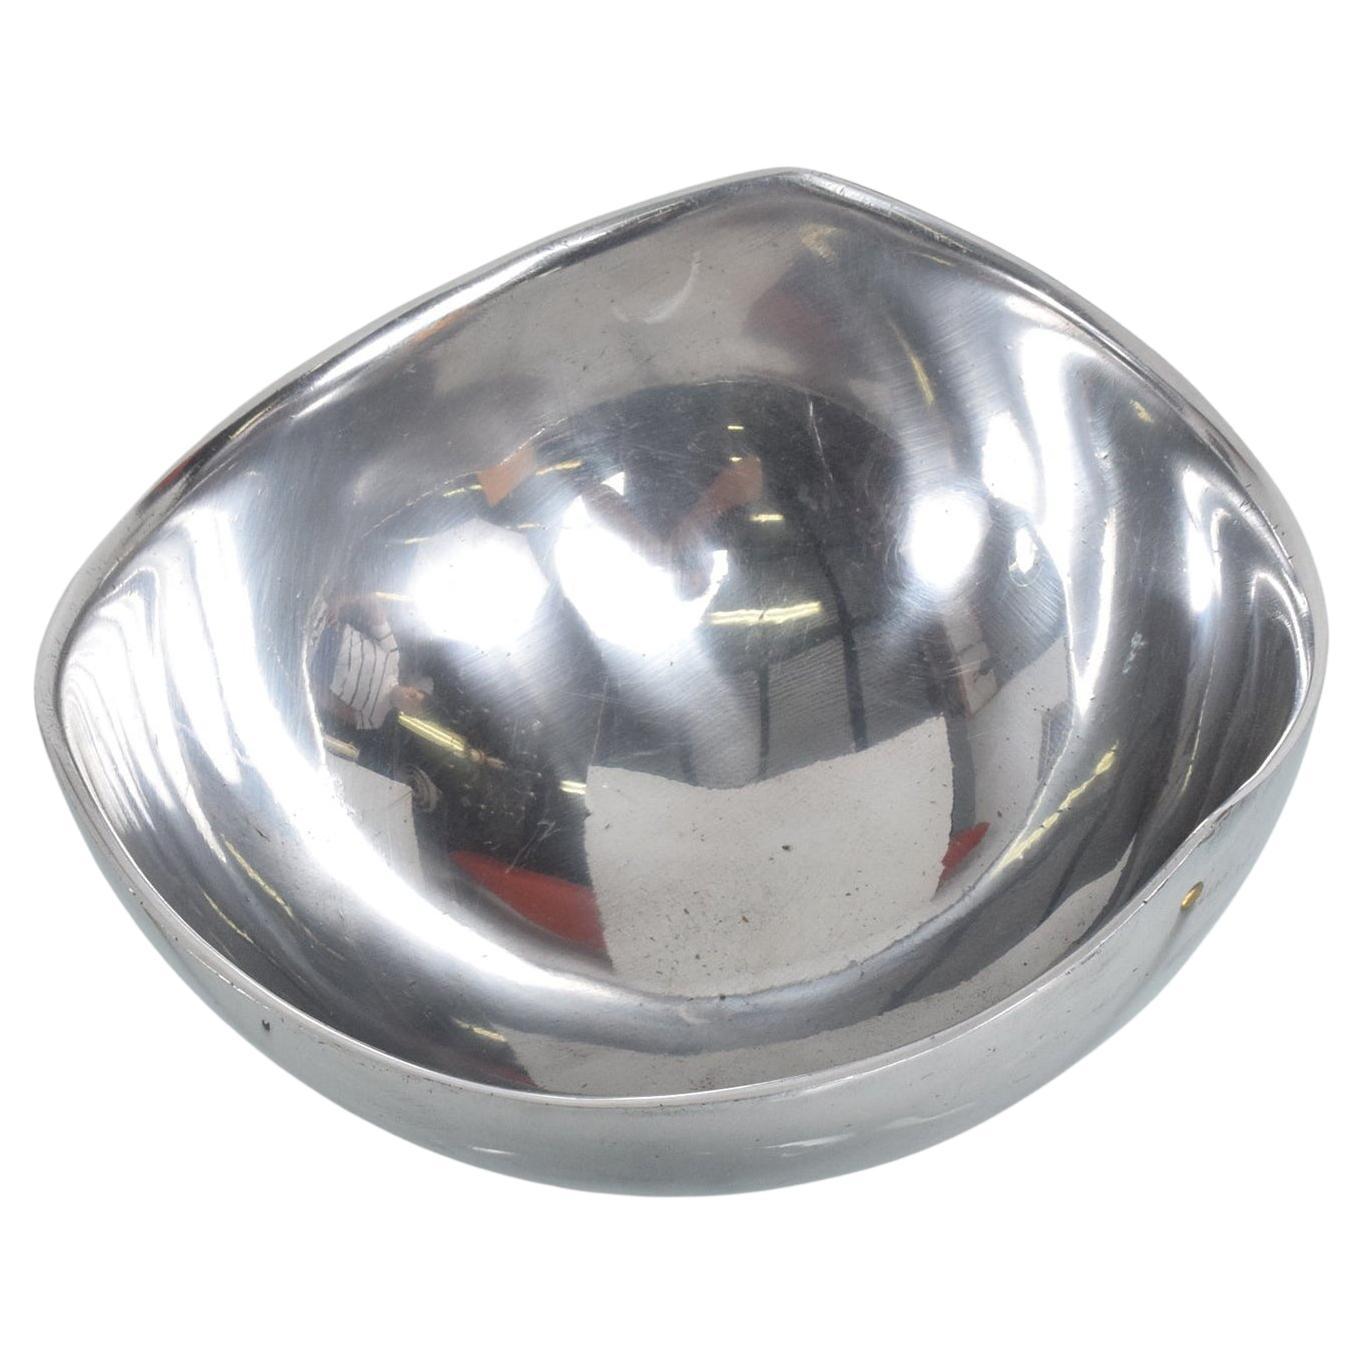 Bowl
Modern Nambe bowl in metal alloy, recently polished.
Stamped by maker 527 tri corner design.
Dimensions: 4 1/2